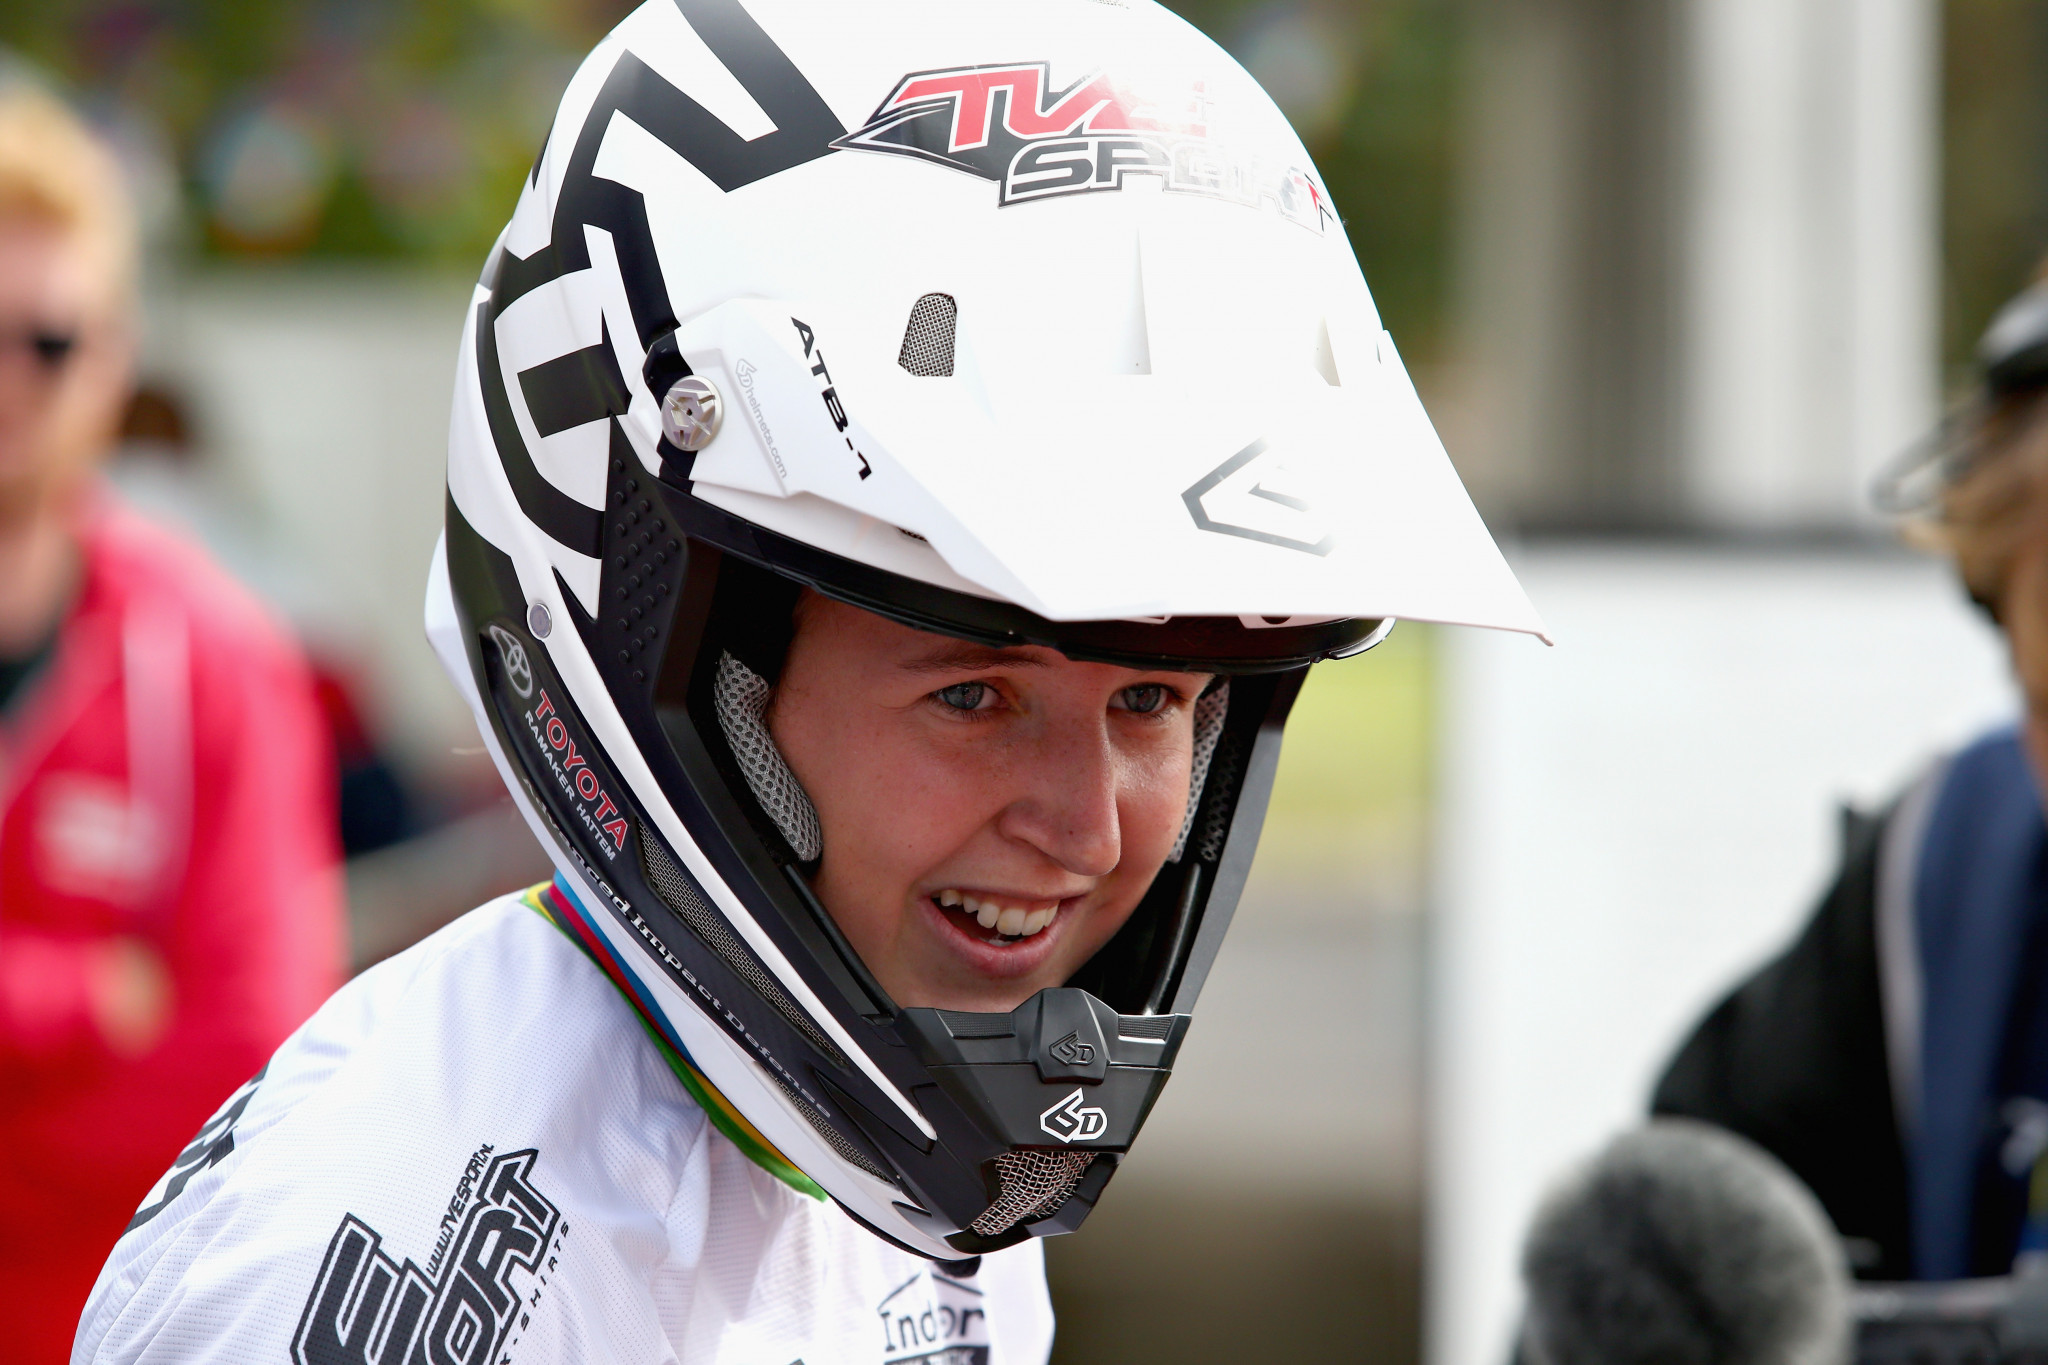 Smulders collects fourth European BMX title